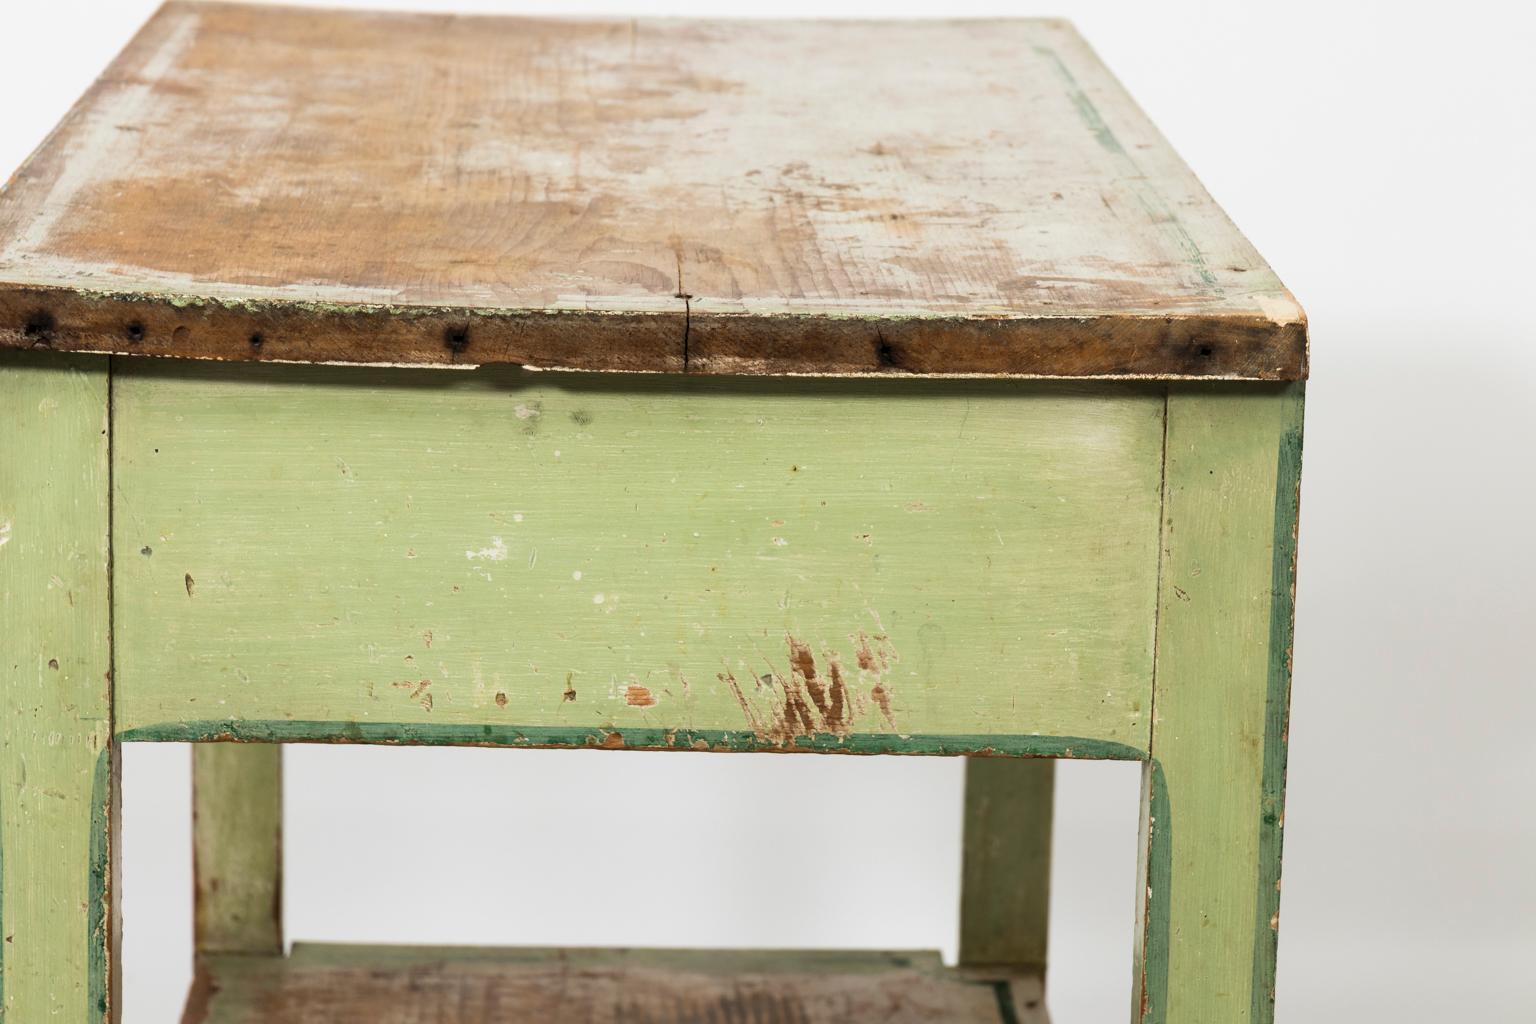 19th Century French Painted Table